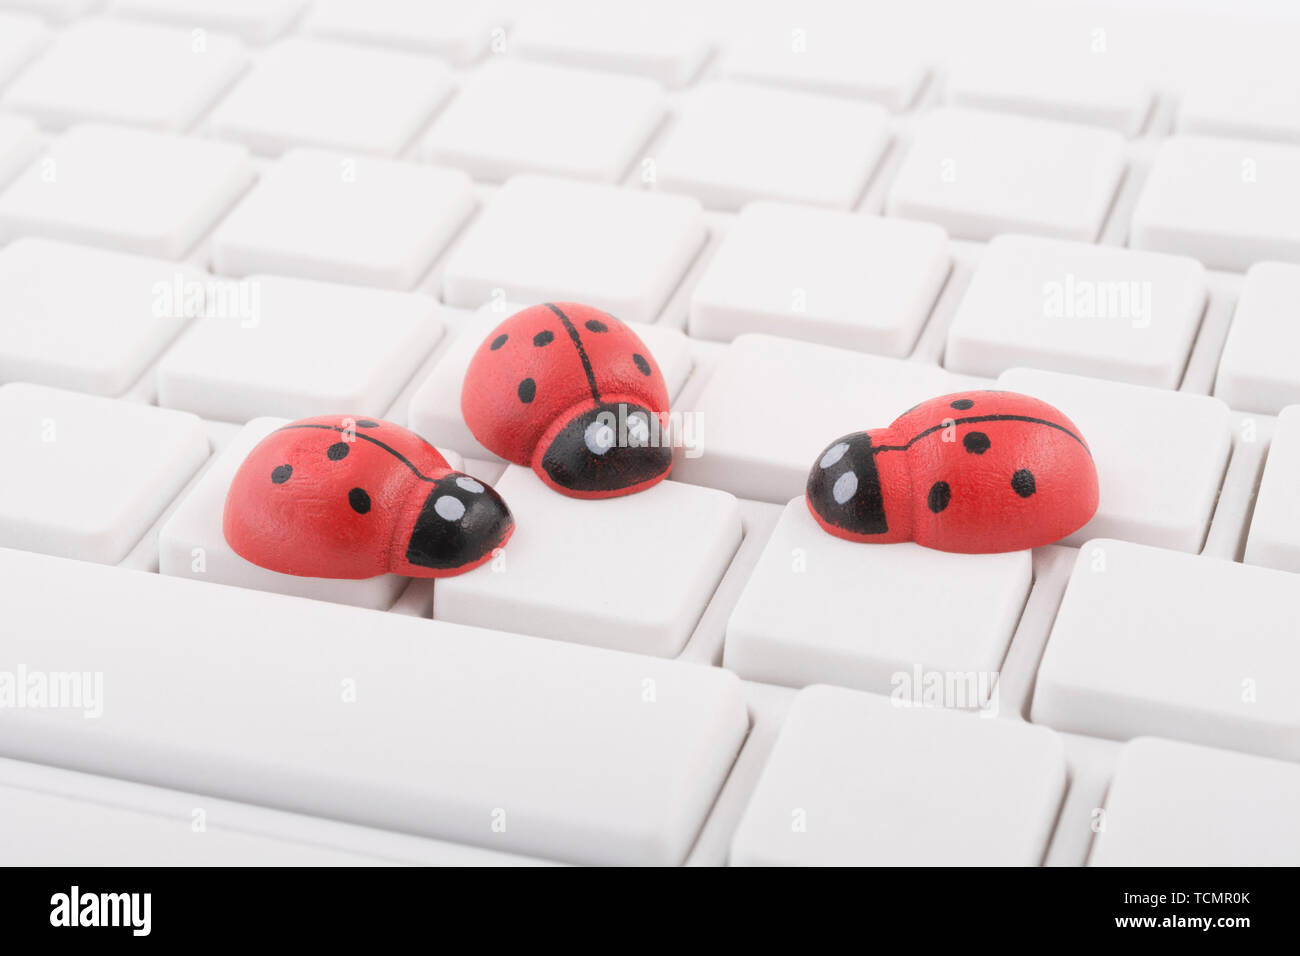 Ladybirds / ladybugs on blank white Qwerty PC keyboard - visual metaphor for concept of computer bug, or viral / system 'infection', computer gremlins Stock Photo